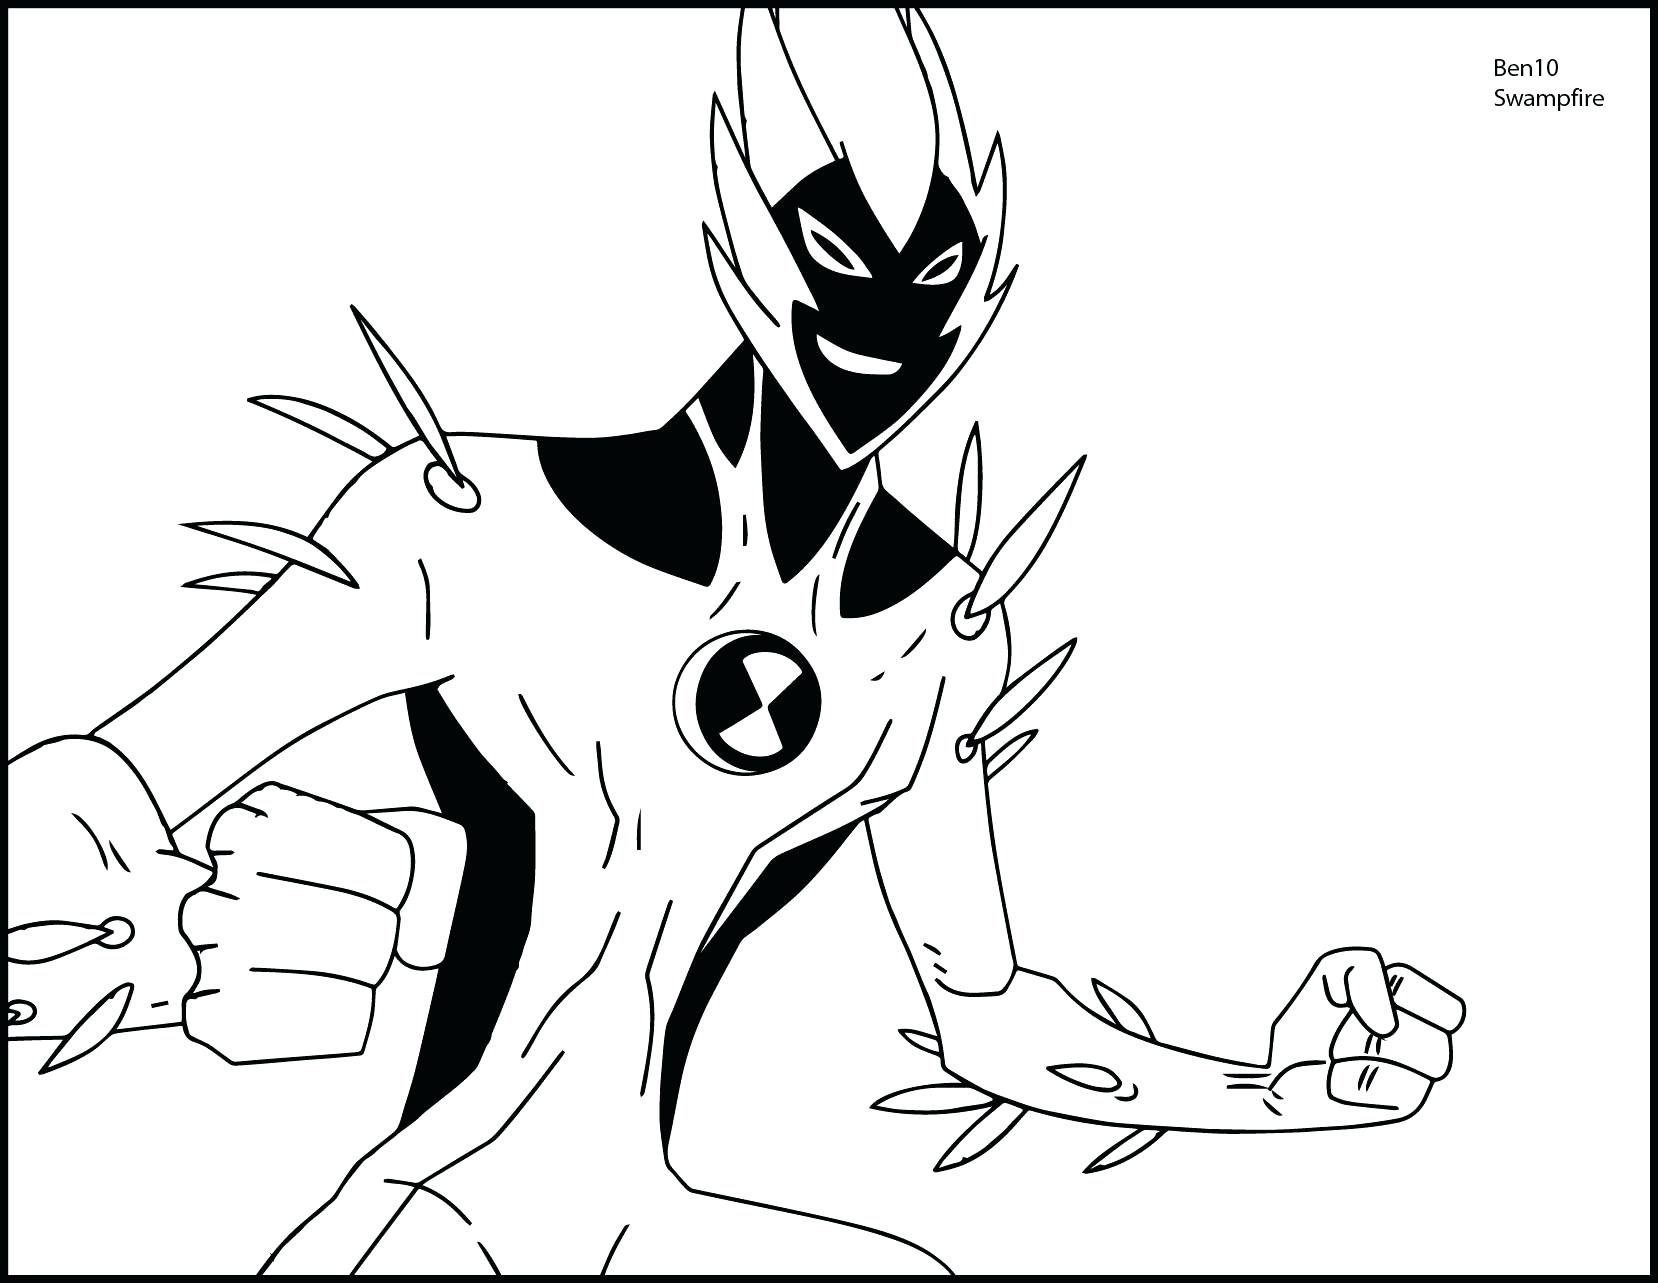 Ben 10 Coloring Pages Online Ben 10 Coloring Book Cortexcolorco